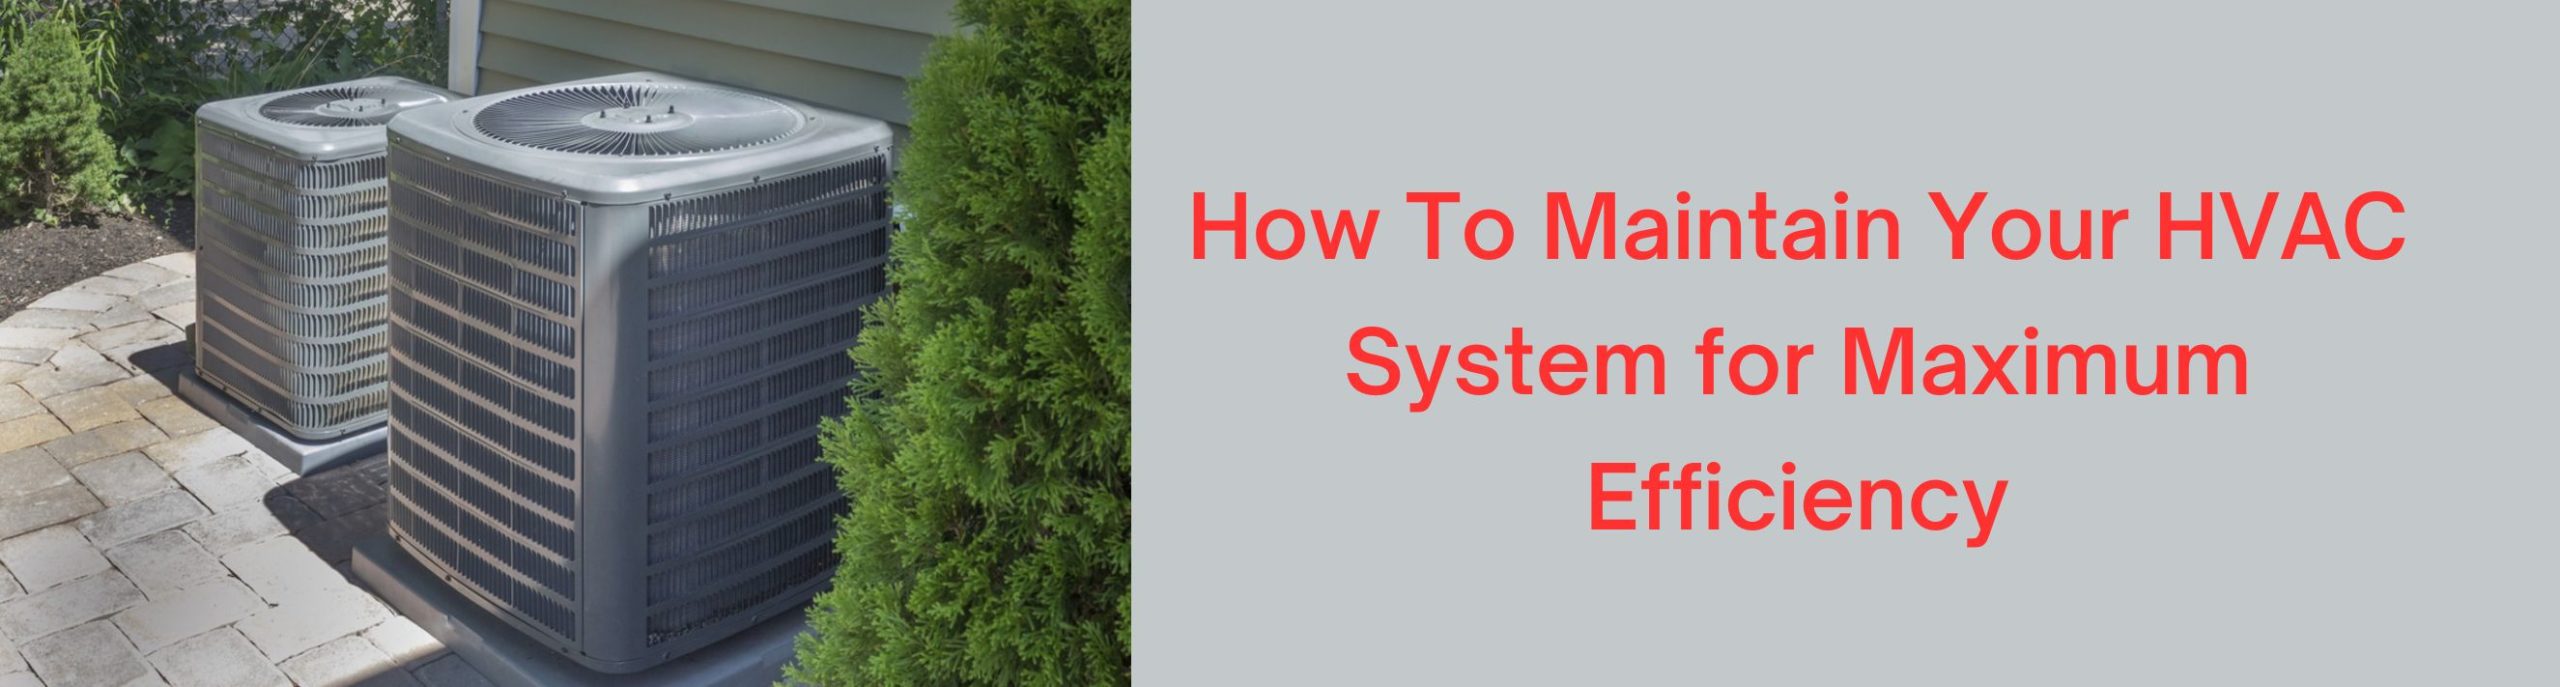 Image for How To Maintain Your HVAC System for Maximum Efficiency